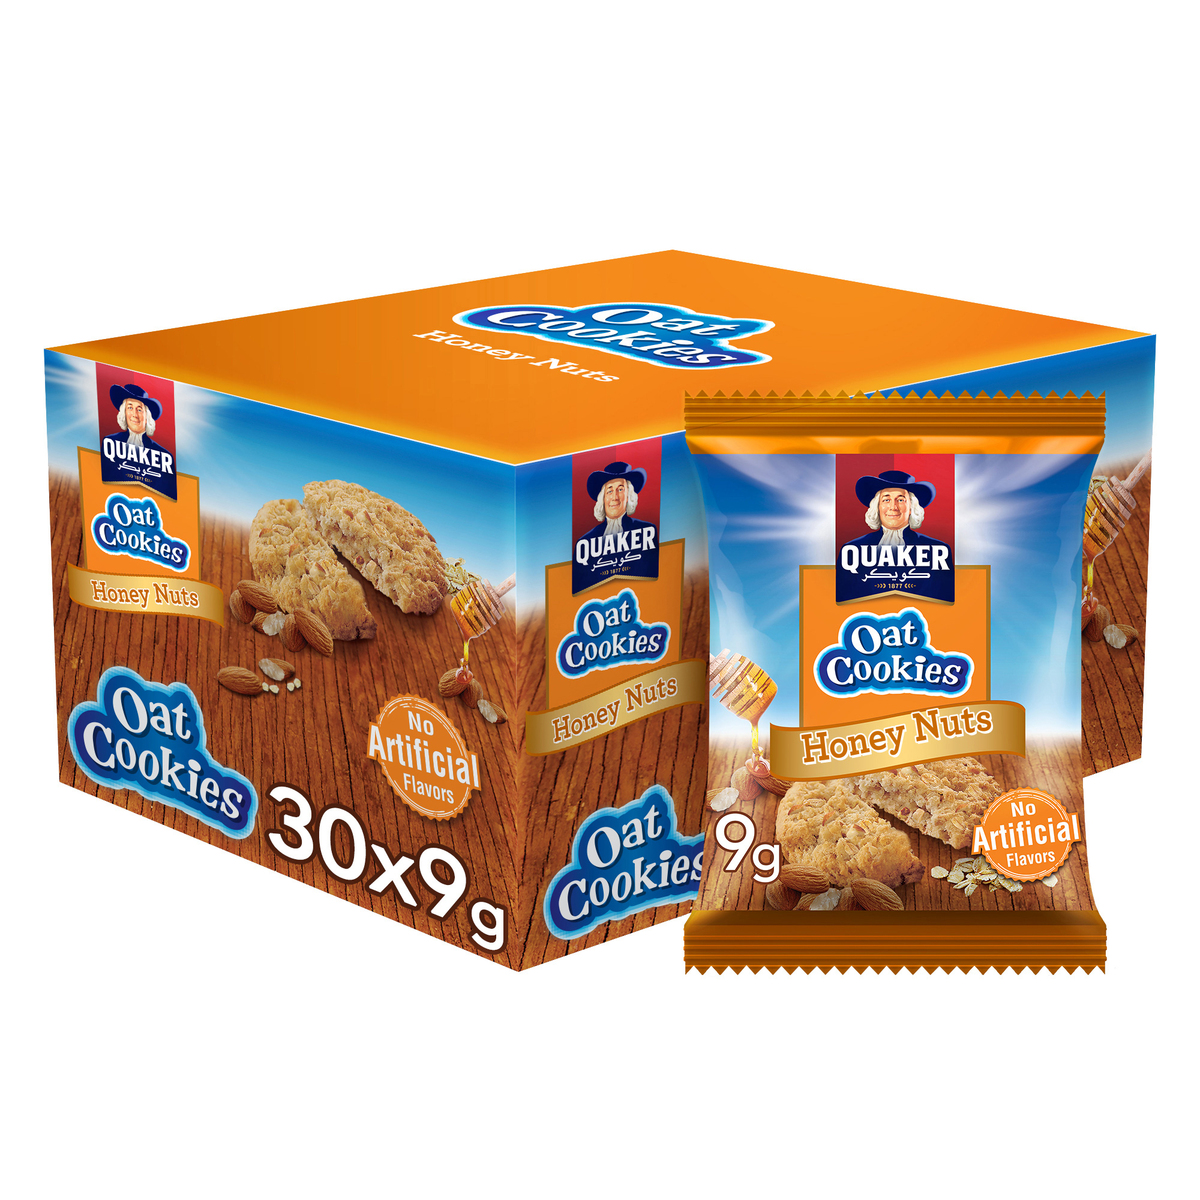 Quaker Oat Cookies with Honey Nuts 30 x 9 g